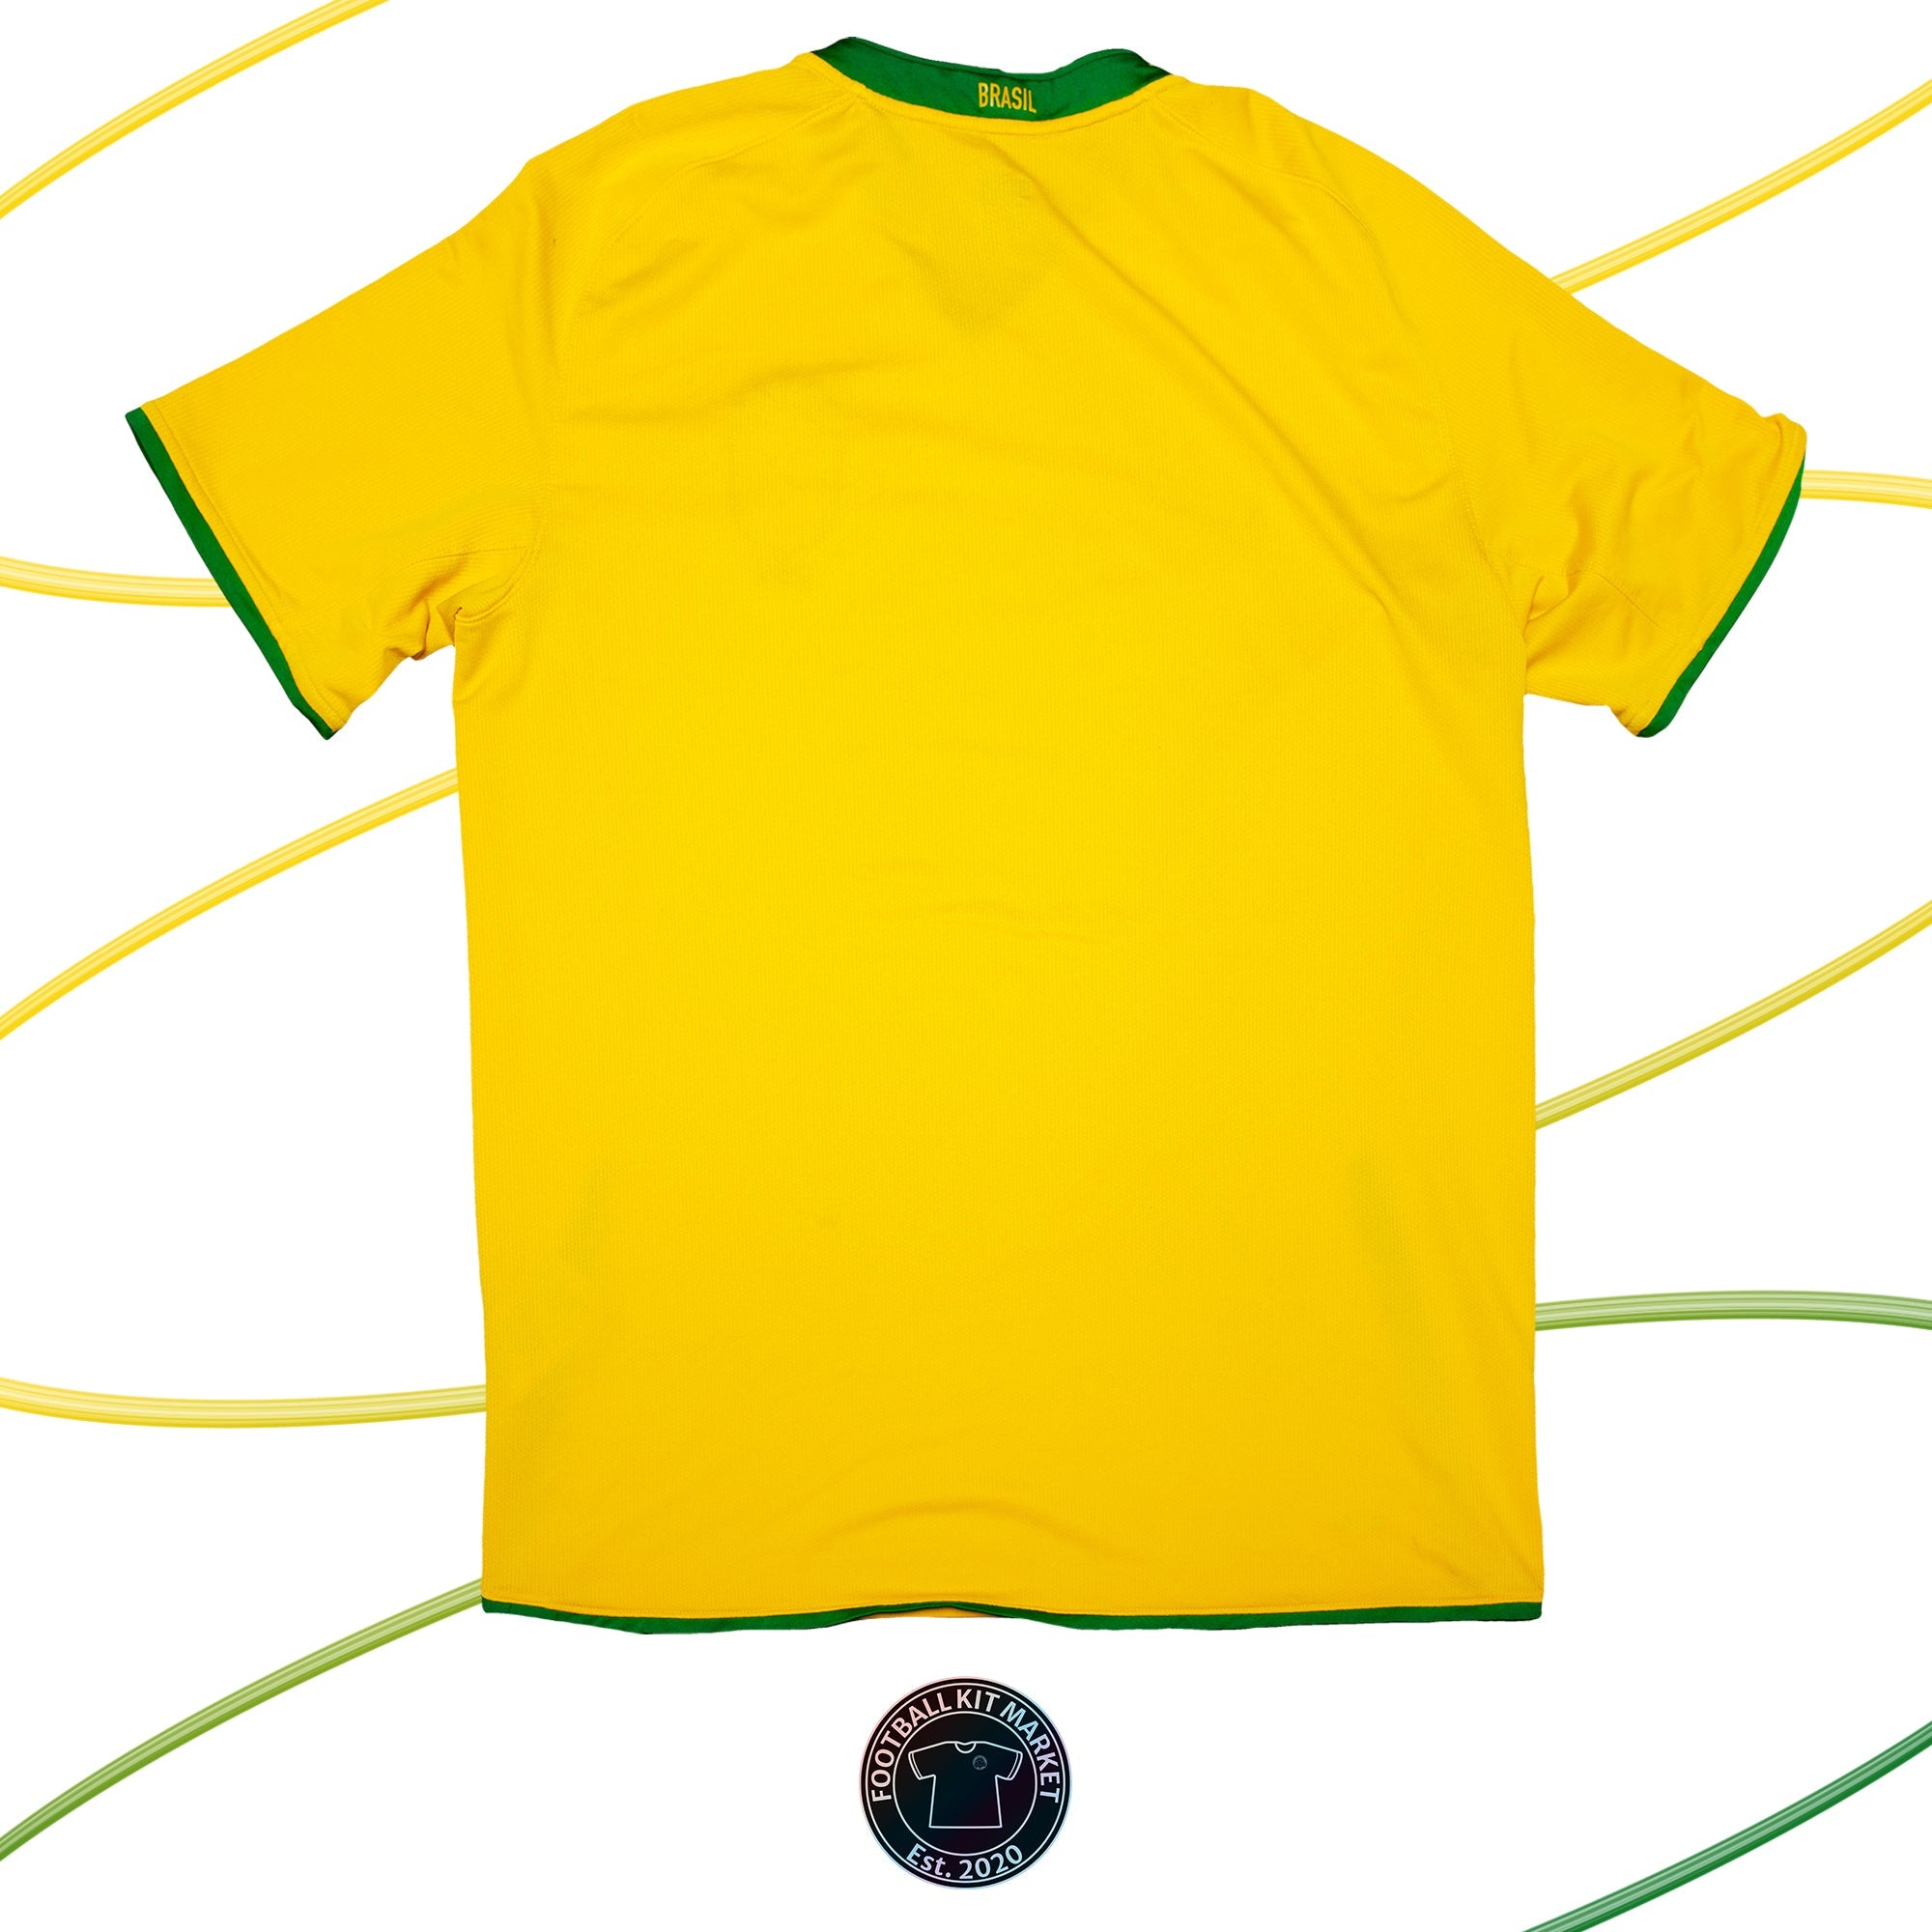 Genuine BRAZIL Home (2008-2010) - NIKE (XL) - Product Image from Football Kit Market